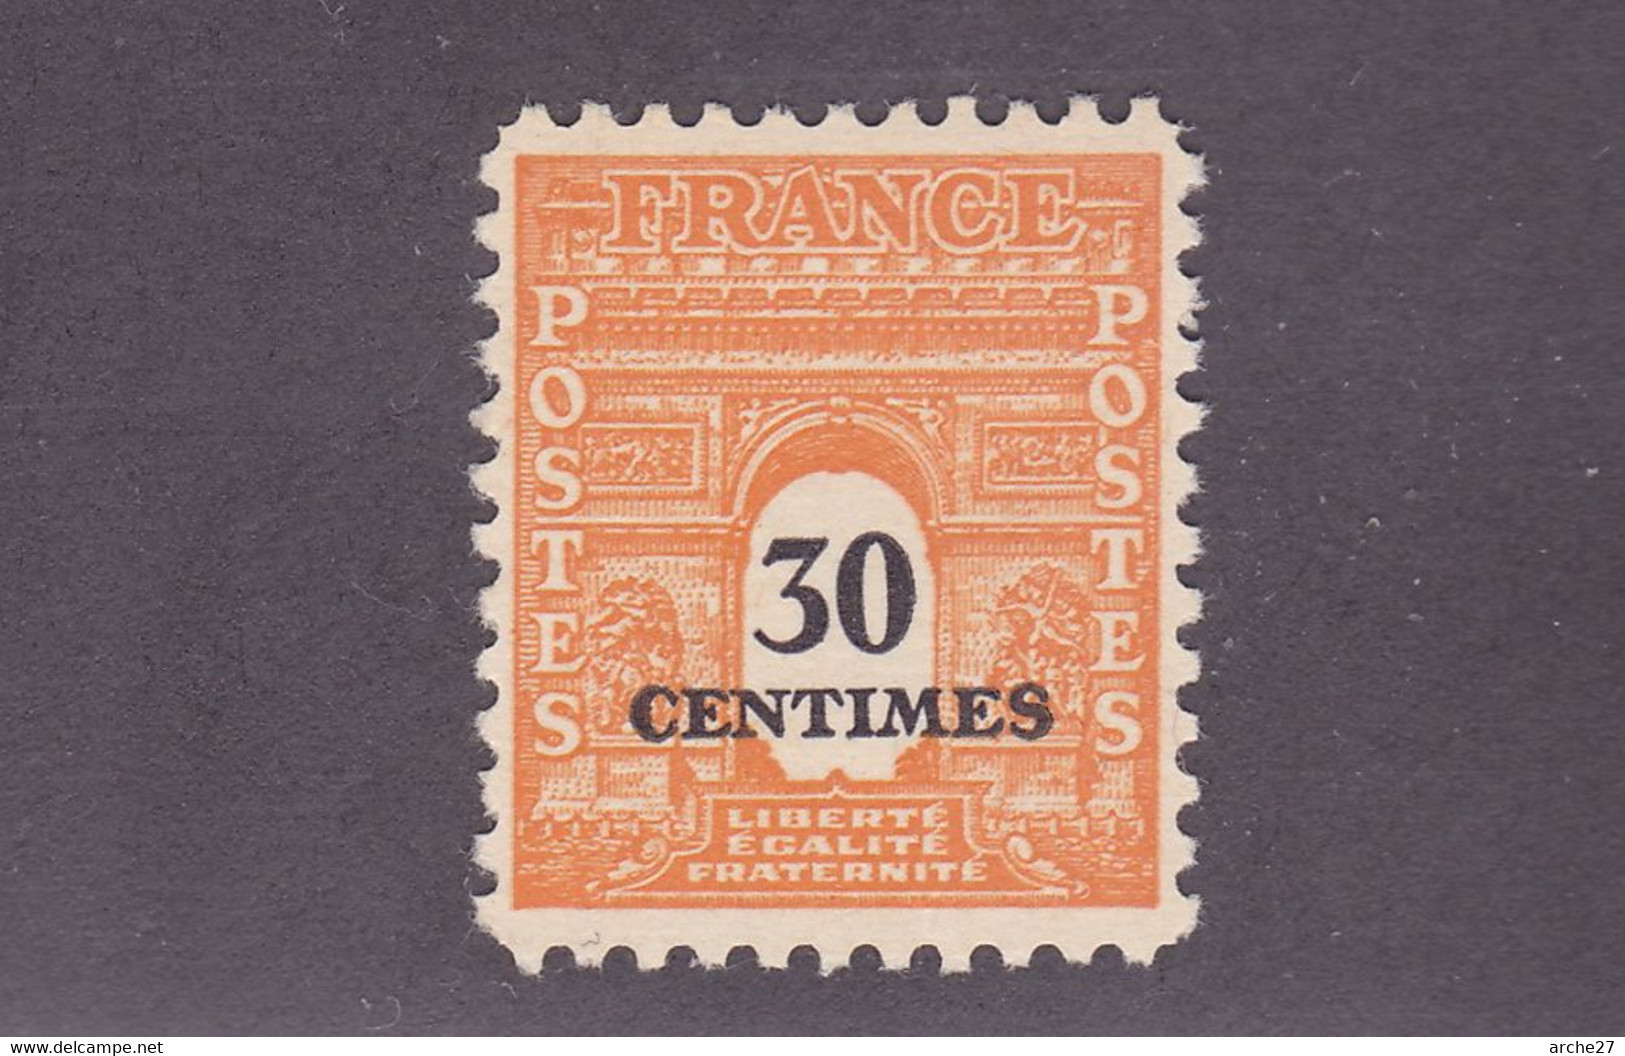 TIMBRE FRANCE N° 702 NEUF ** - Unused Stamps